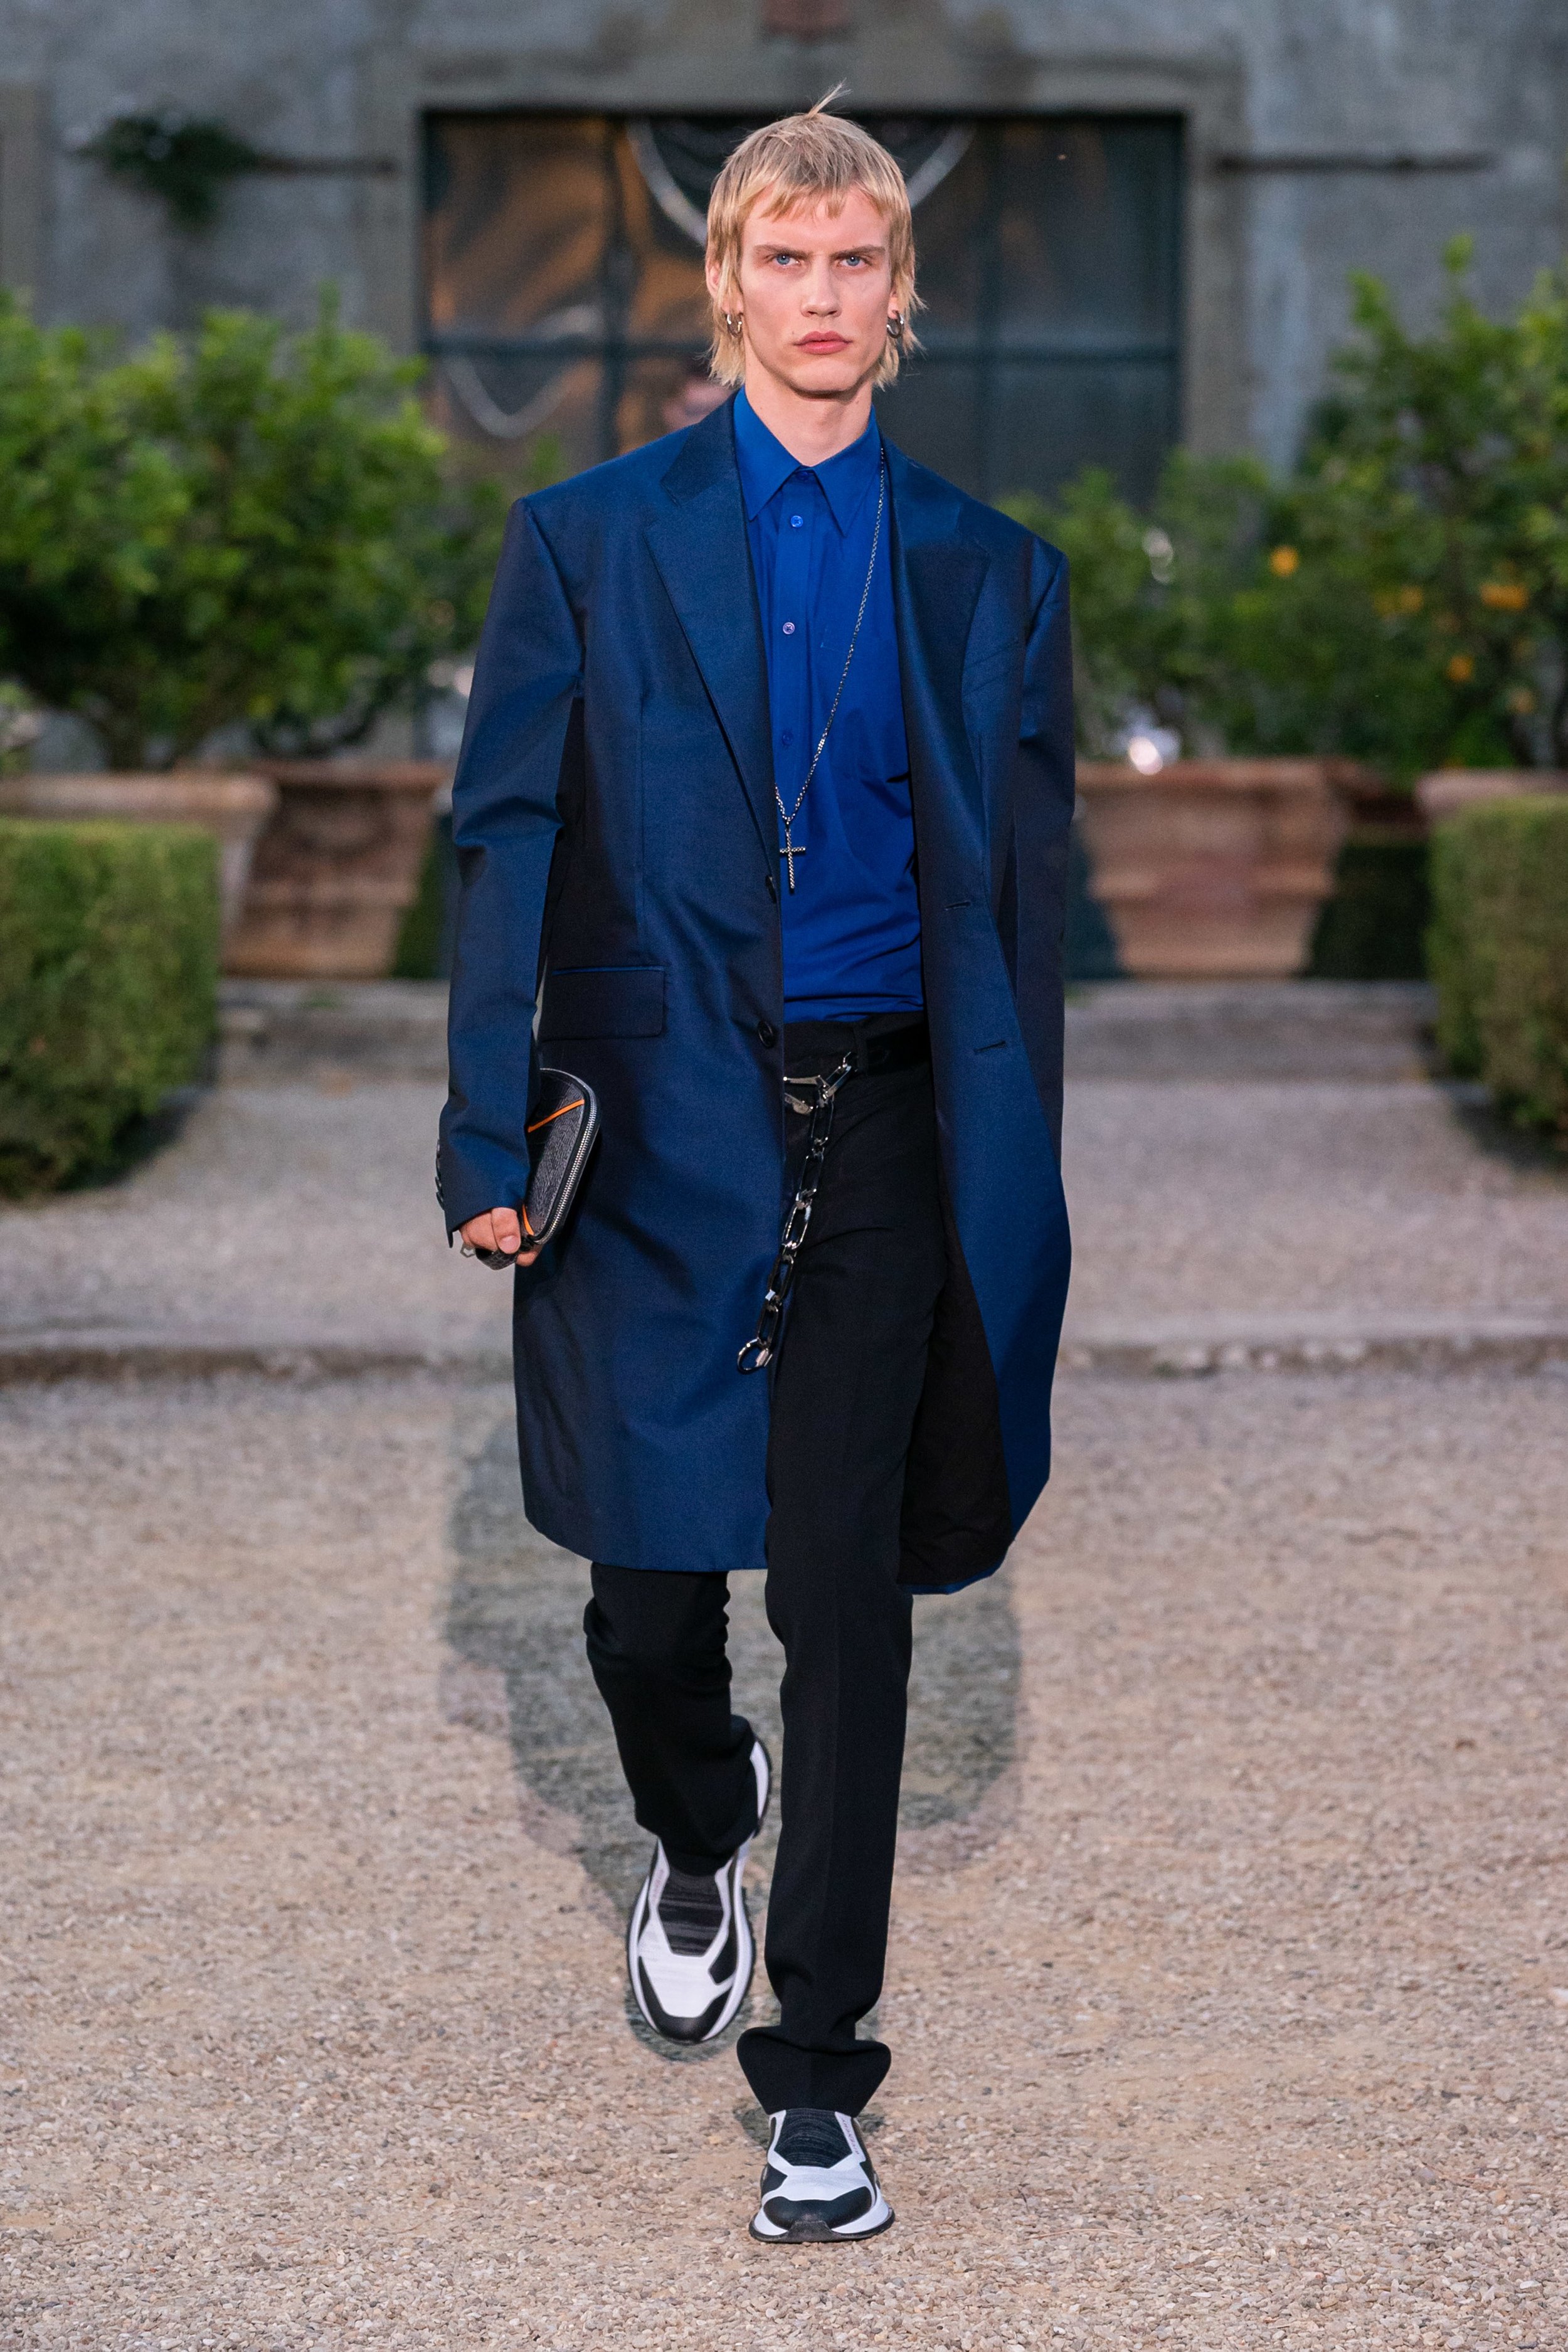 Behind_The_Blinds_Magazine_Givenchy_Men_SS20_Pitti_ALE0195.jpg